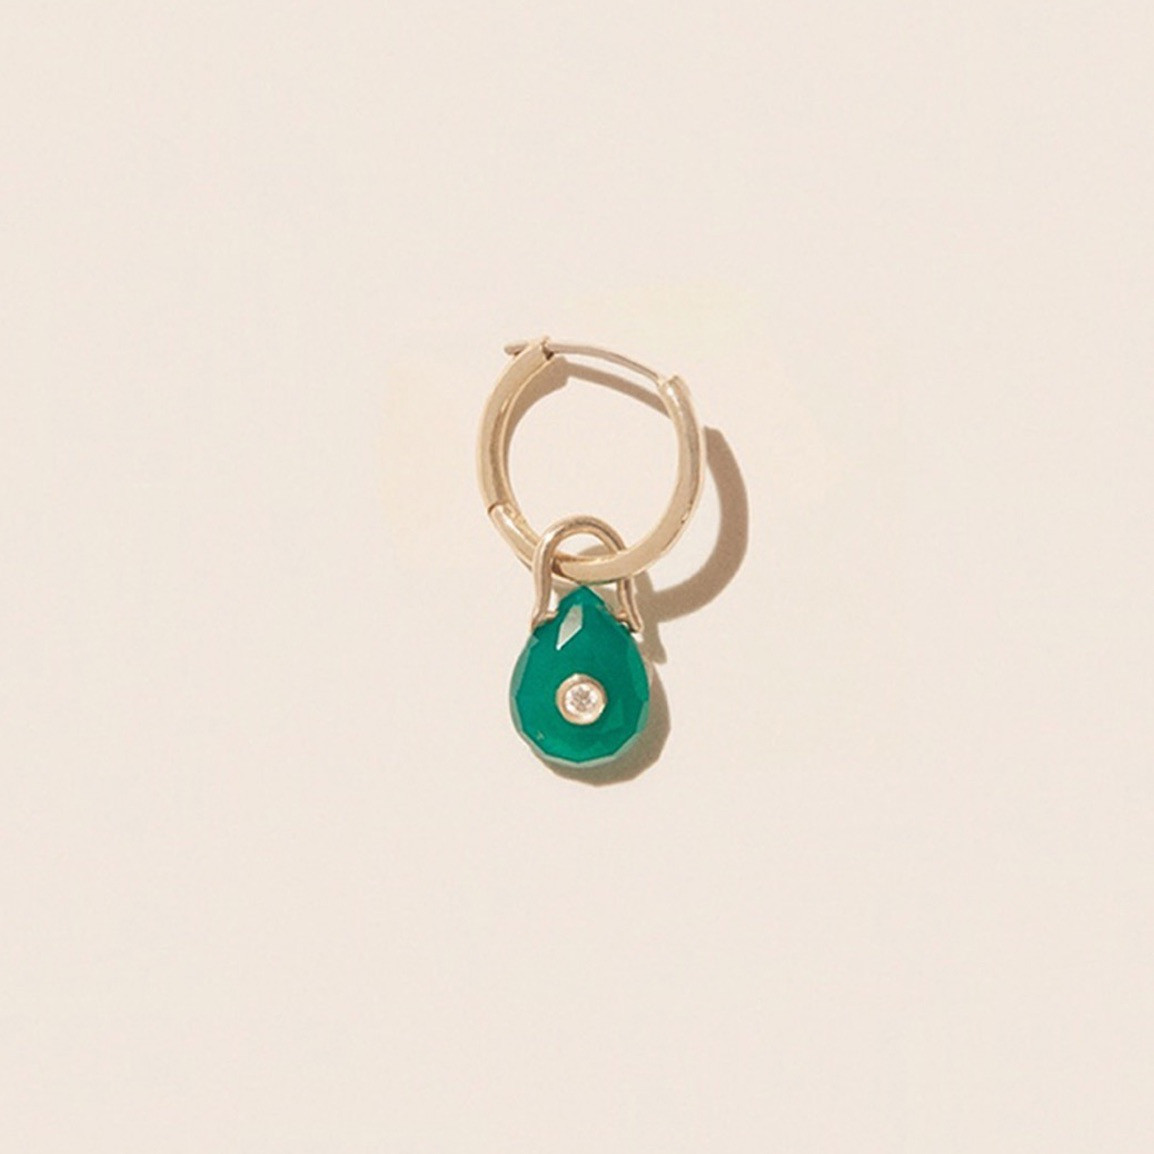 Orso Turquoise & 9ct Yellow Gold Single Earring, Pascale Monvoisin, tomfoolery